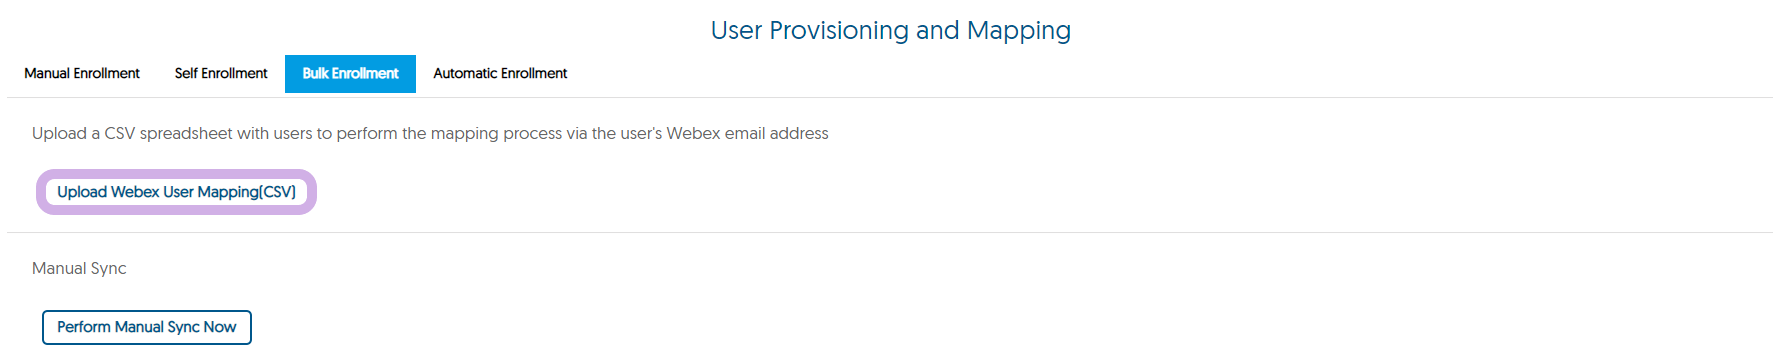 The User Provisioning and Mapping panel for Webex with Upload Webex User Mapping (CSV) selected from Bulk Enrollment.